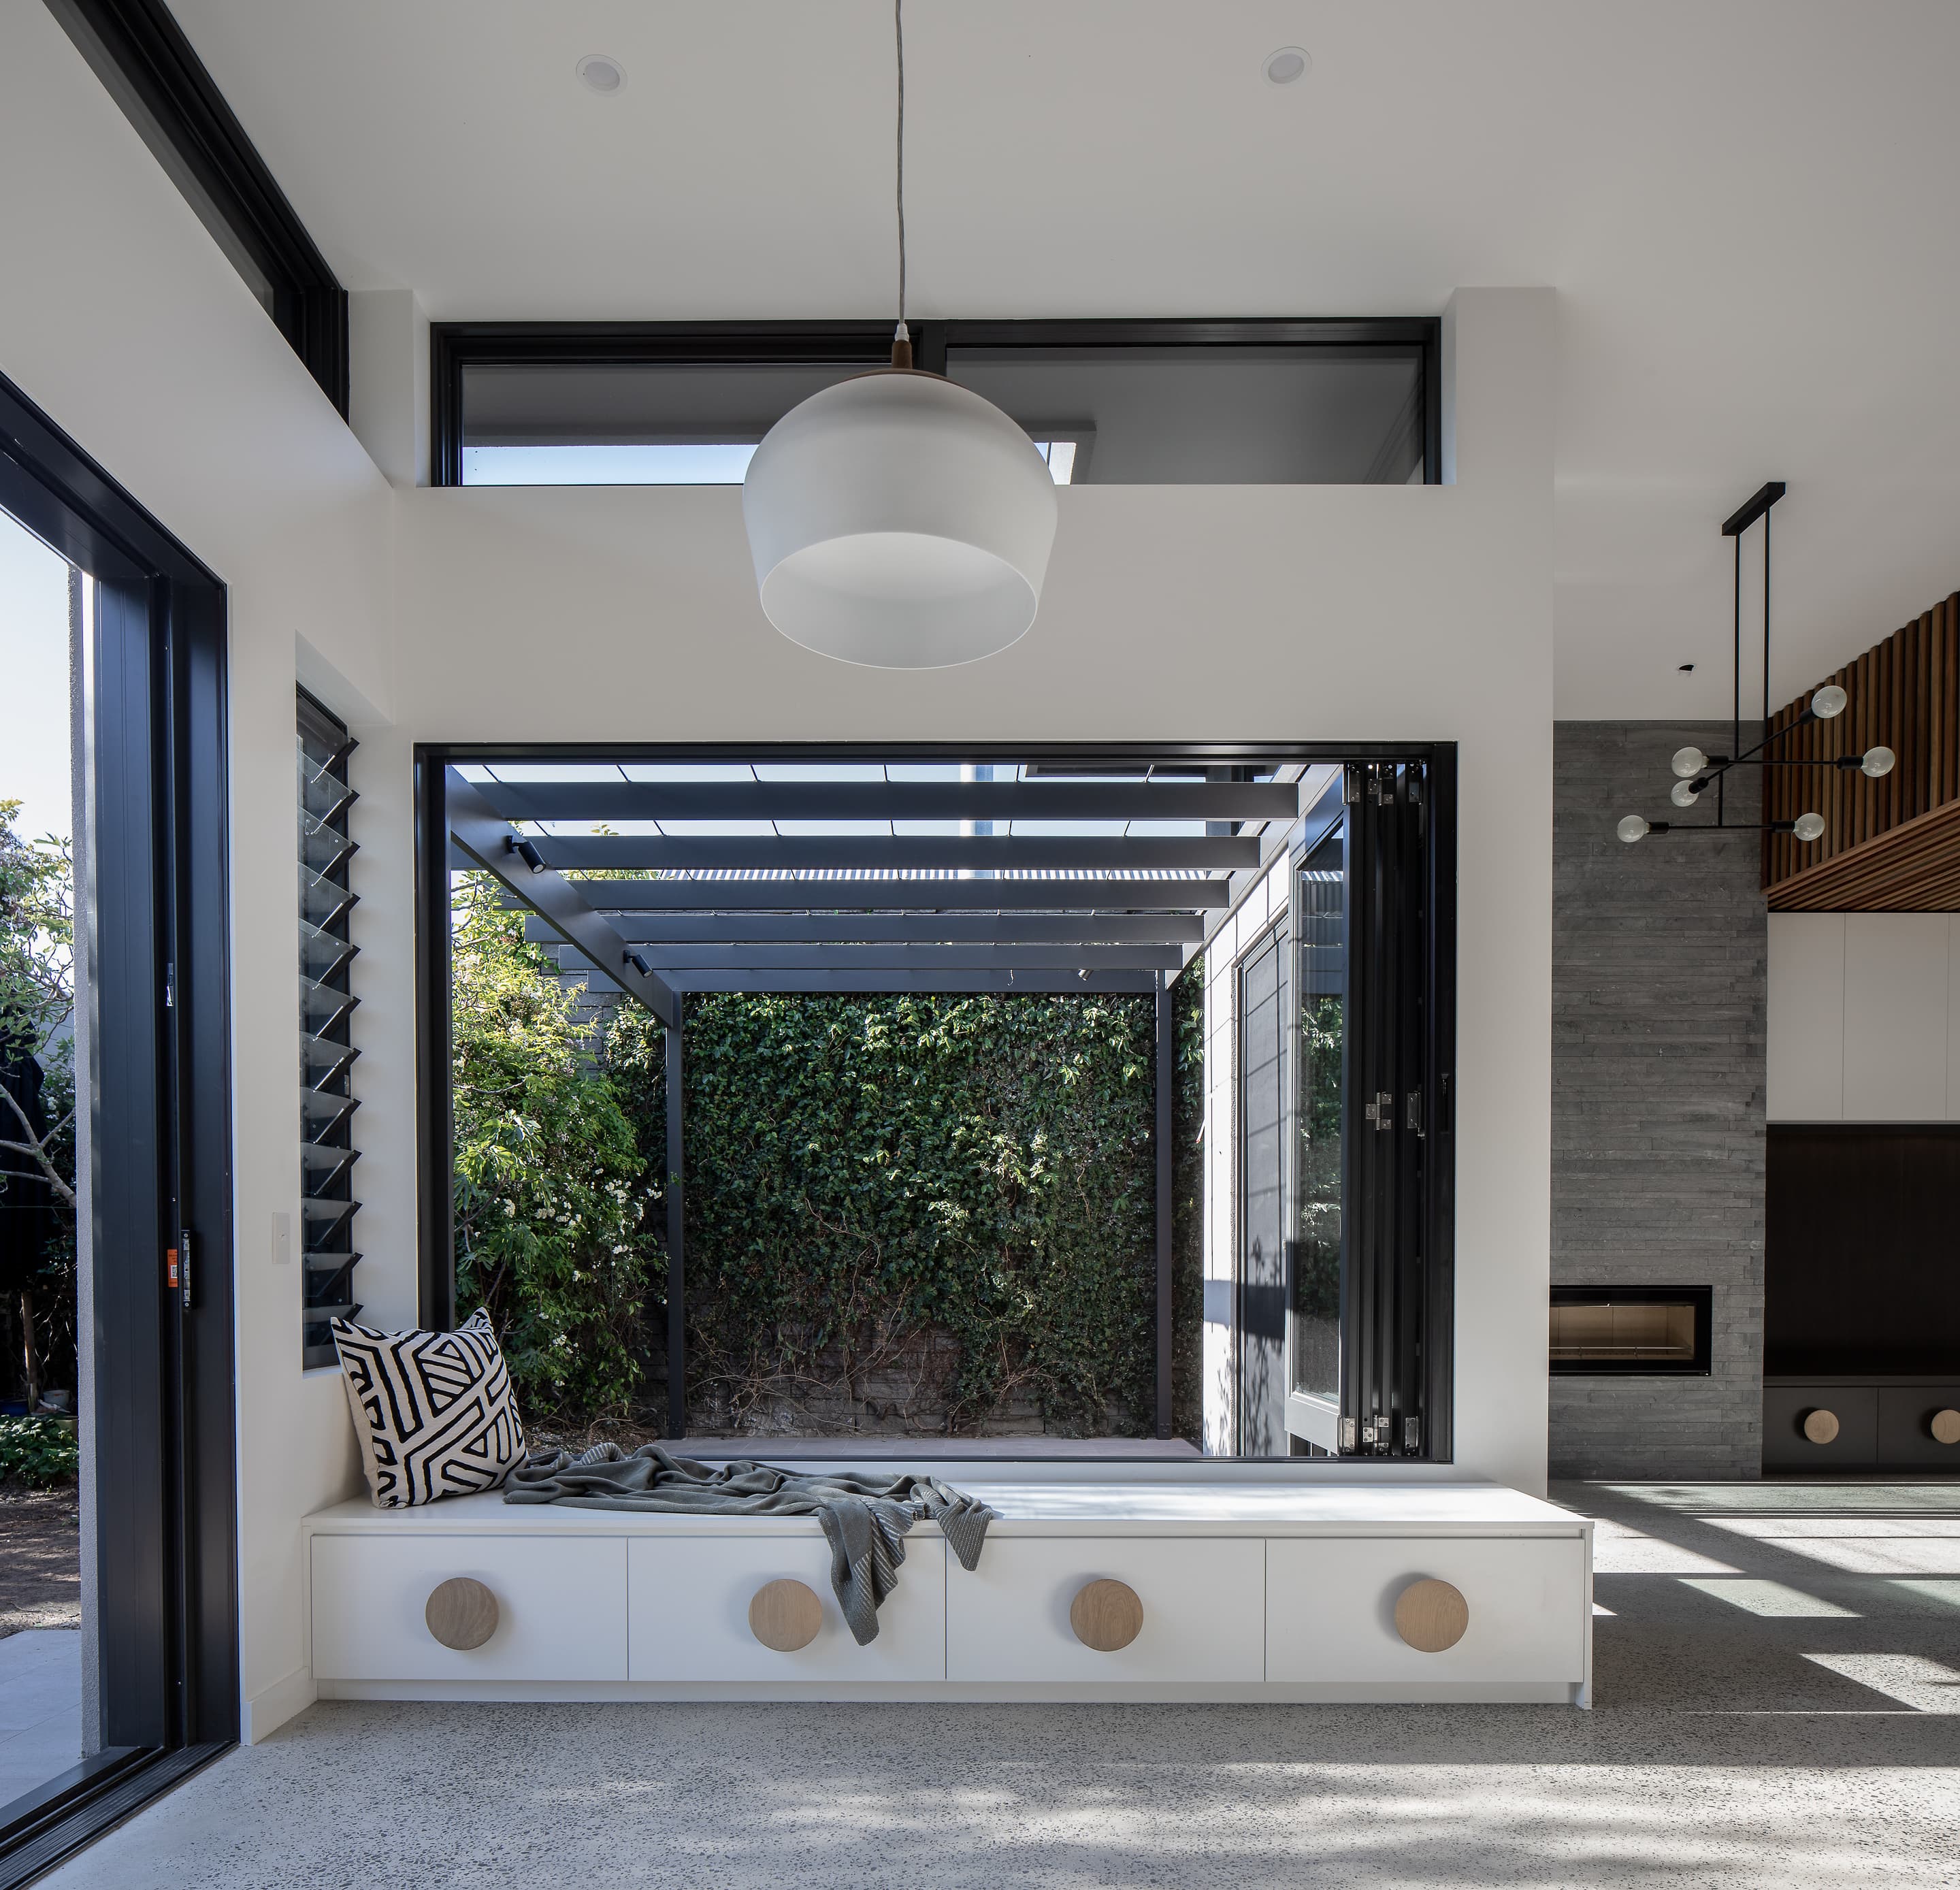 Our Architecture and Interior Design Projects - image Quadrant-Design-architects-31-Gray-St-Cliffton-Hill-9 on https://www.quadrantdesign.com.au